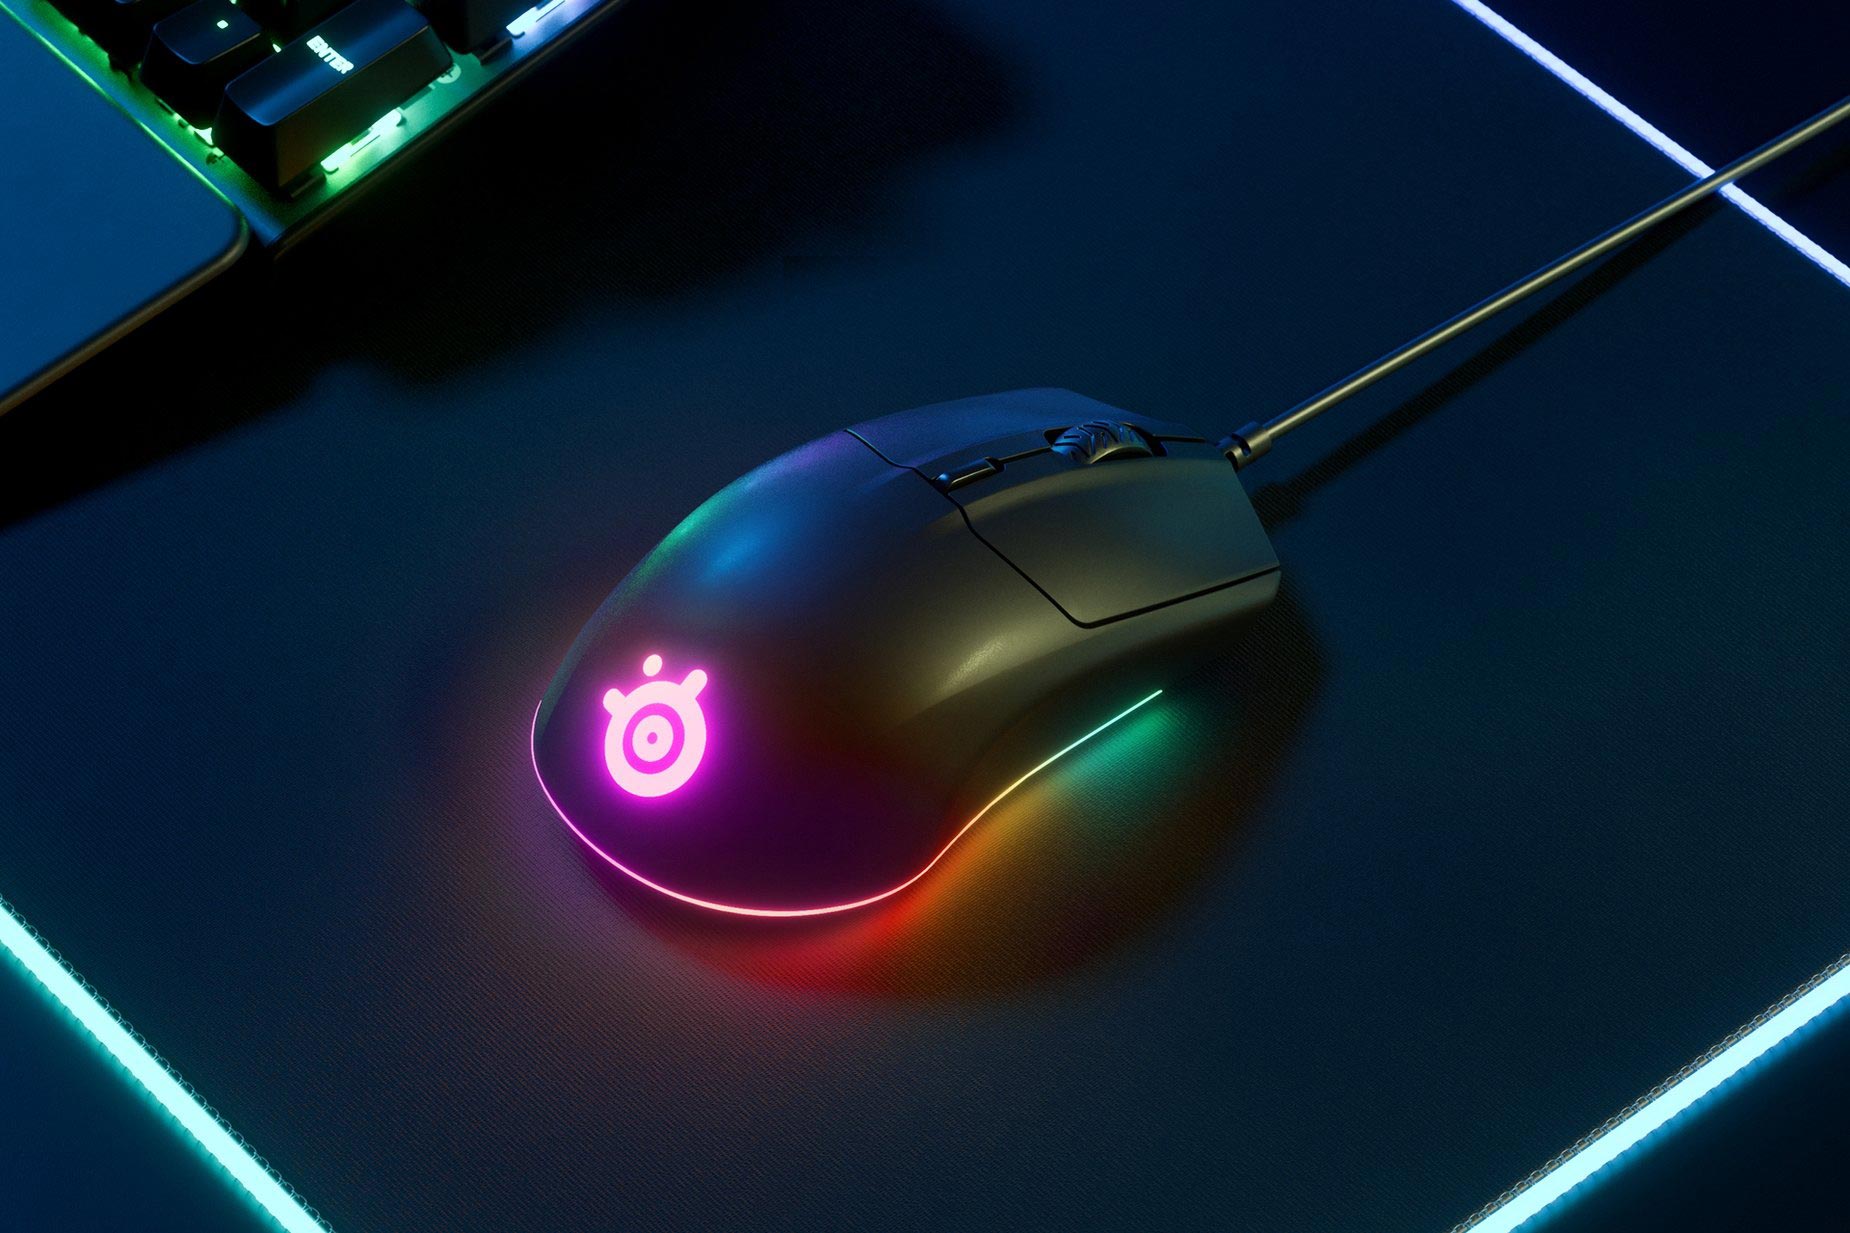 Steelseries Rival 3 mouse